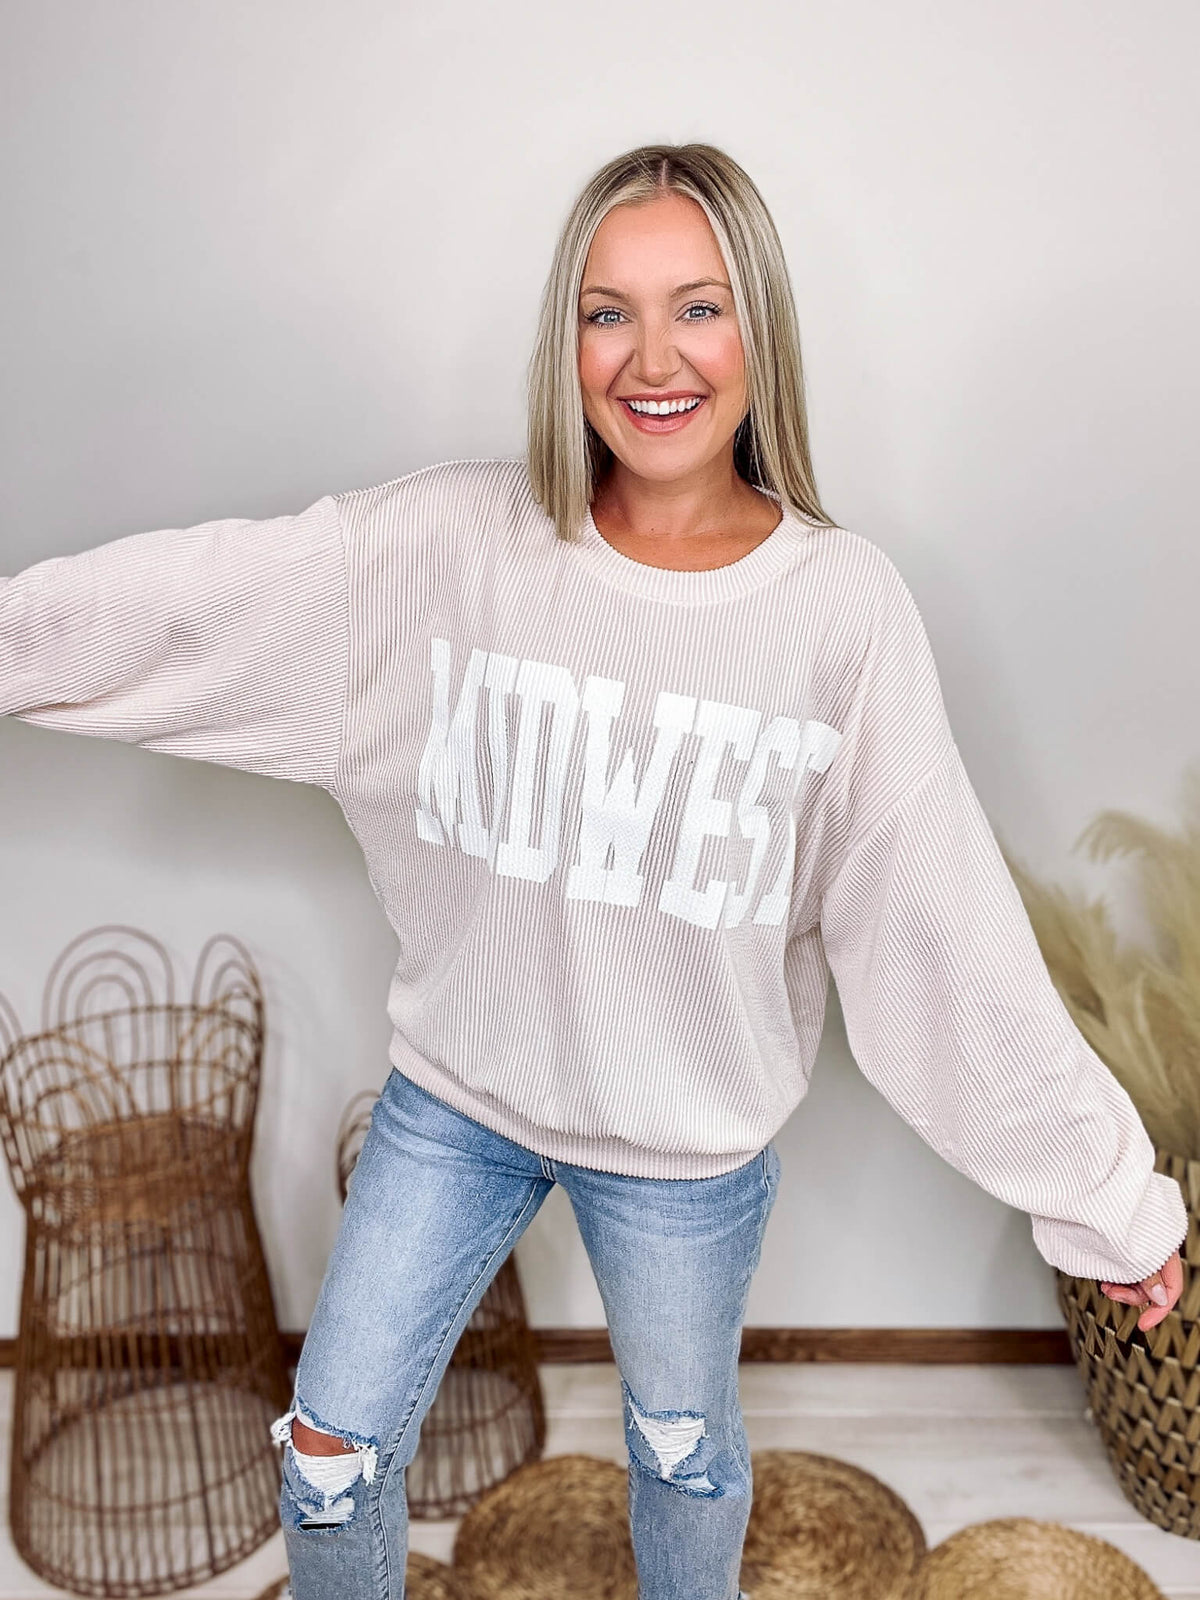 Bucketlist MIDWEST Cream and White Corded Crew Neck Pullover Stretchy Comfy Lightweight Material Oversized Fit 95% Polyester, 5% Spandex